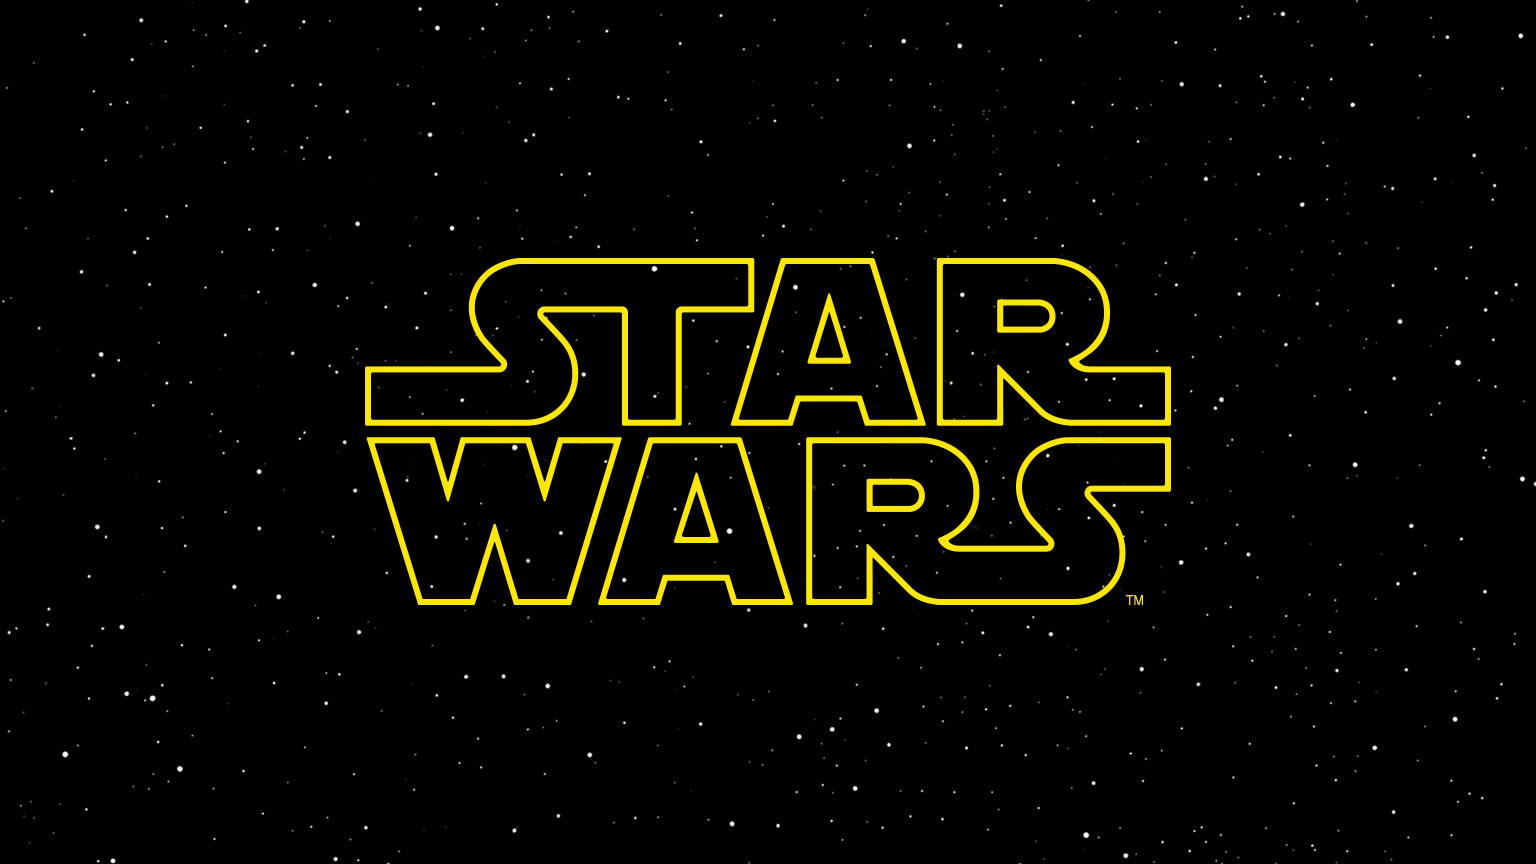 Star Wars Lingo Has Been Added to the Oxford English Dictionary